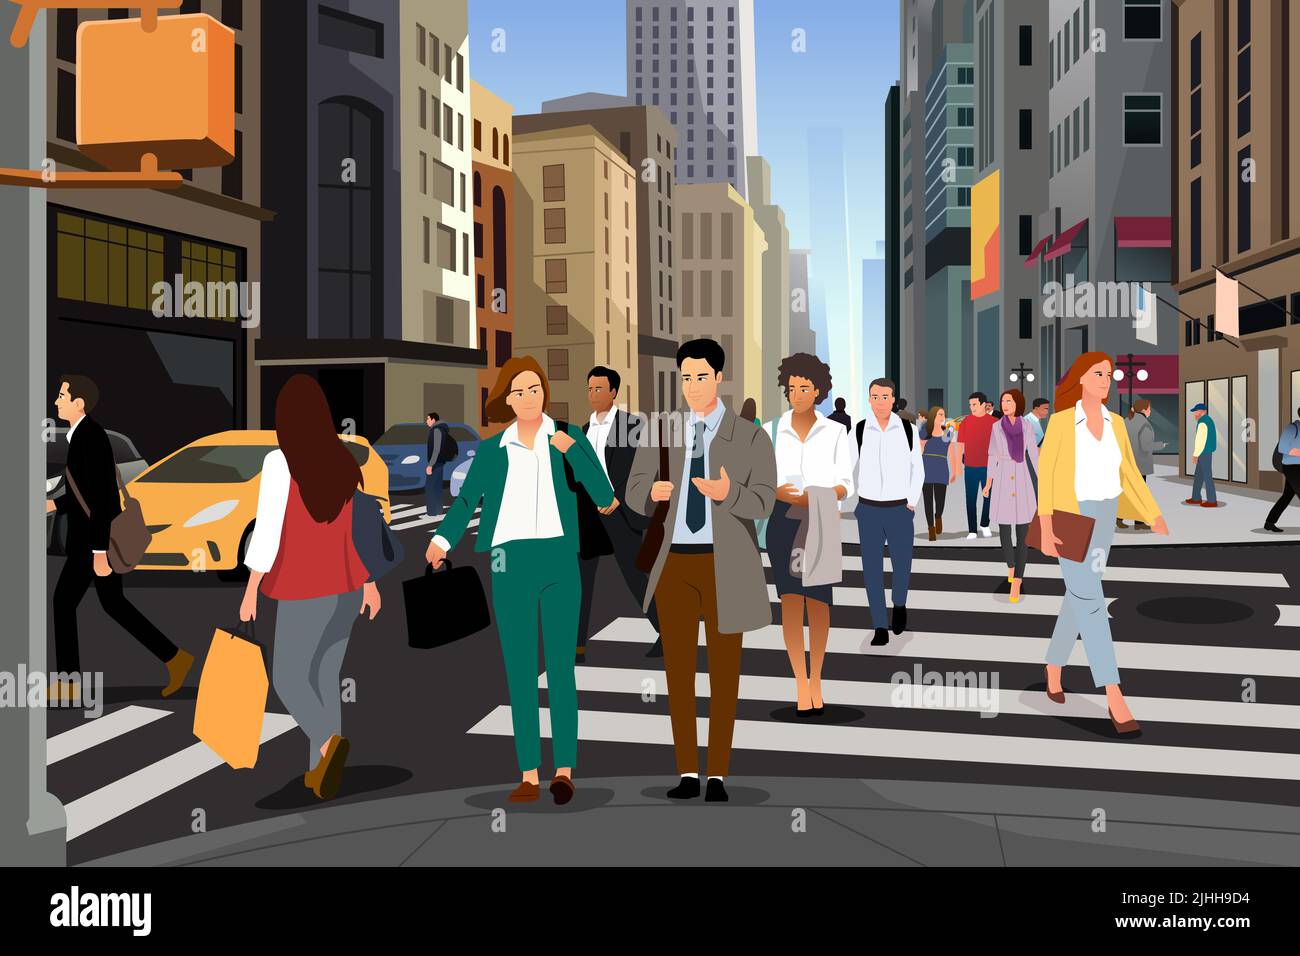 A vector illustration of Business People Walking in the City Going to Work Stock Vector